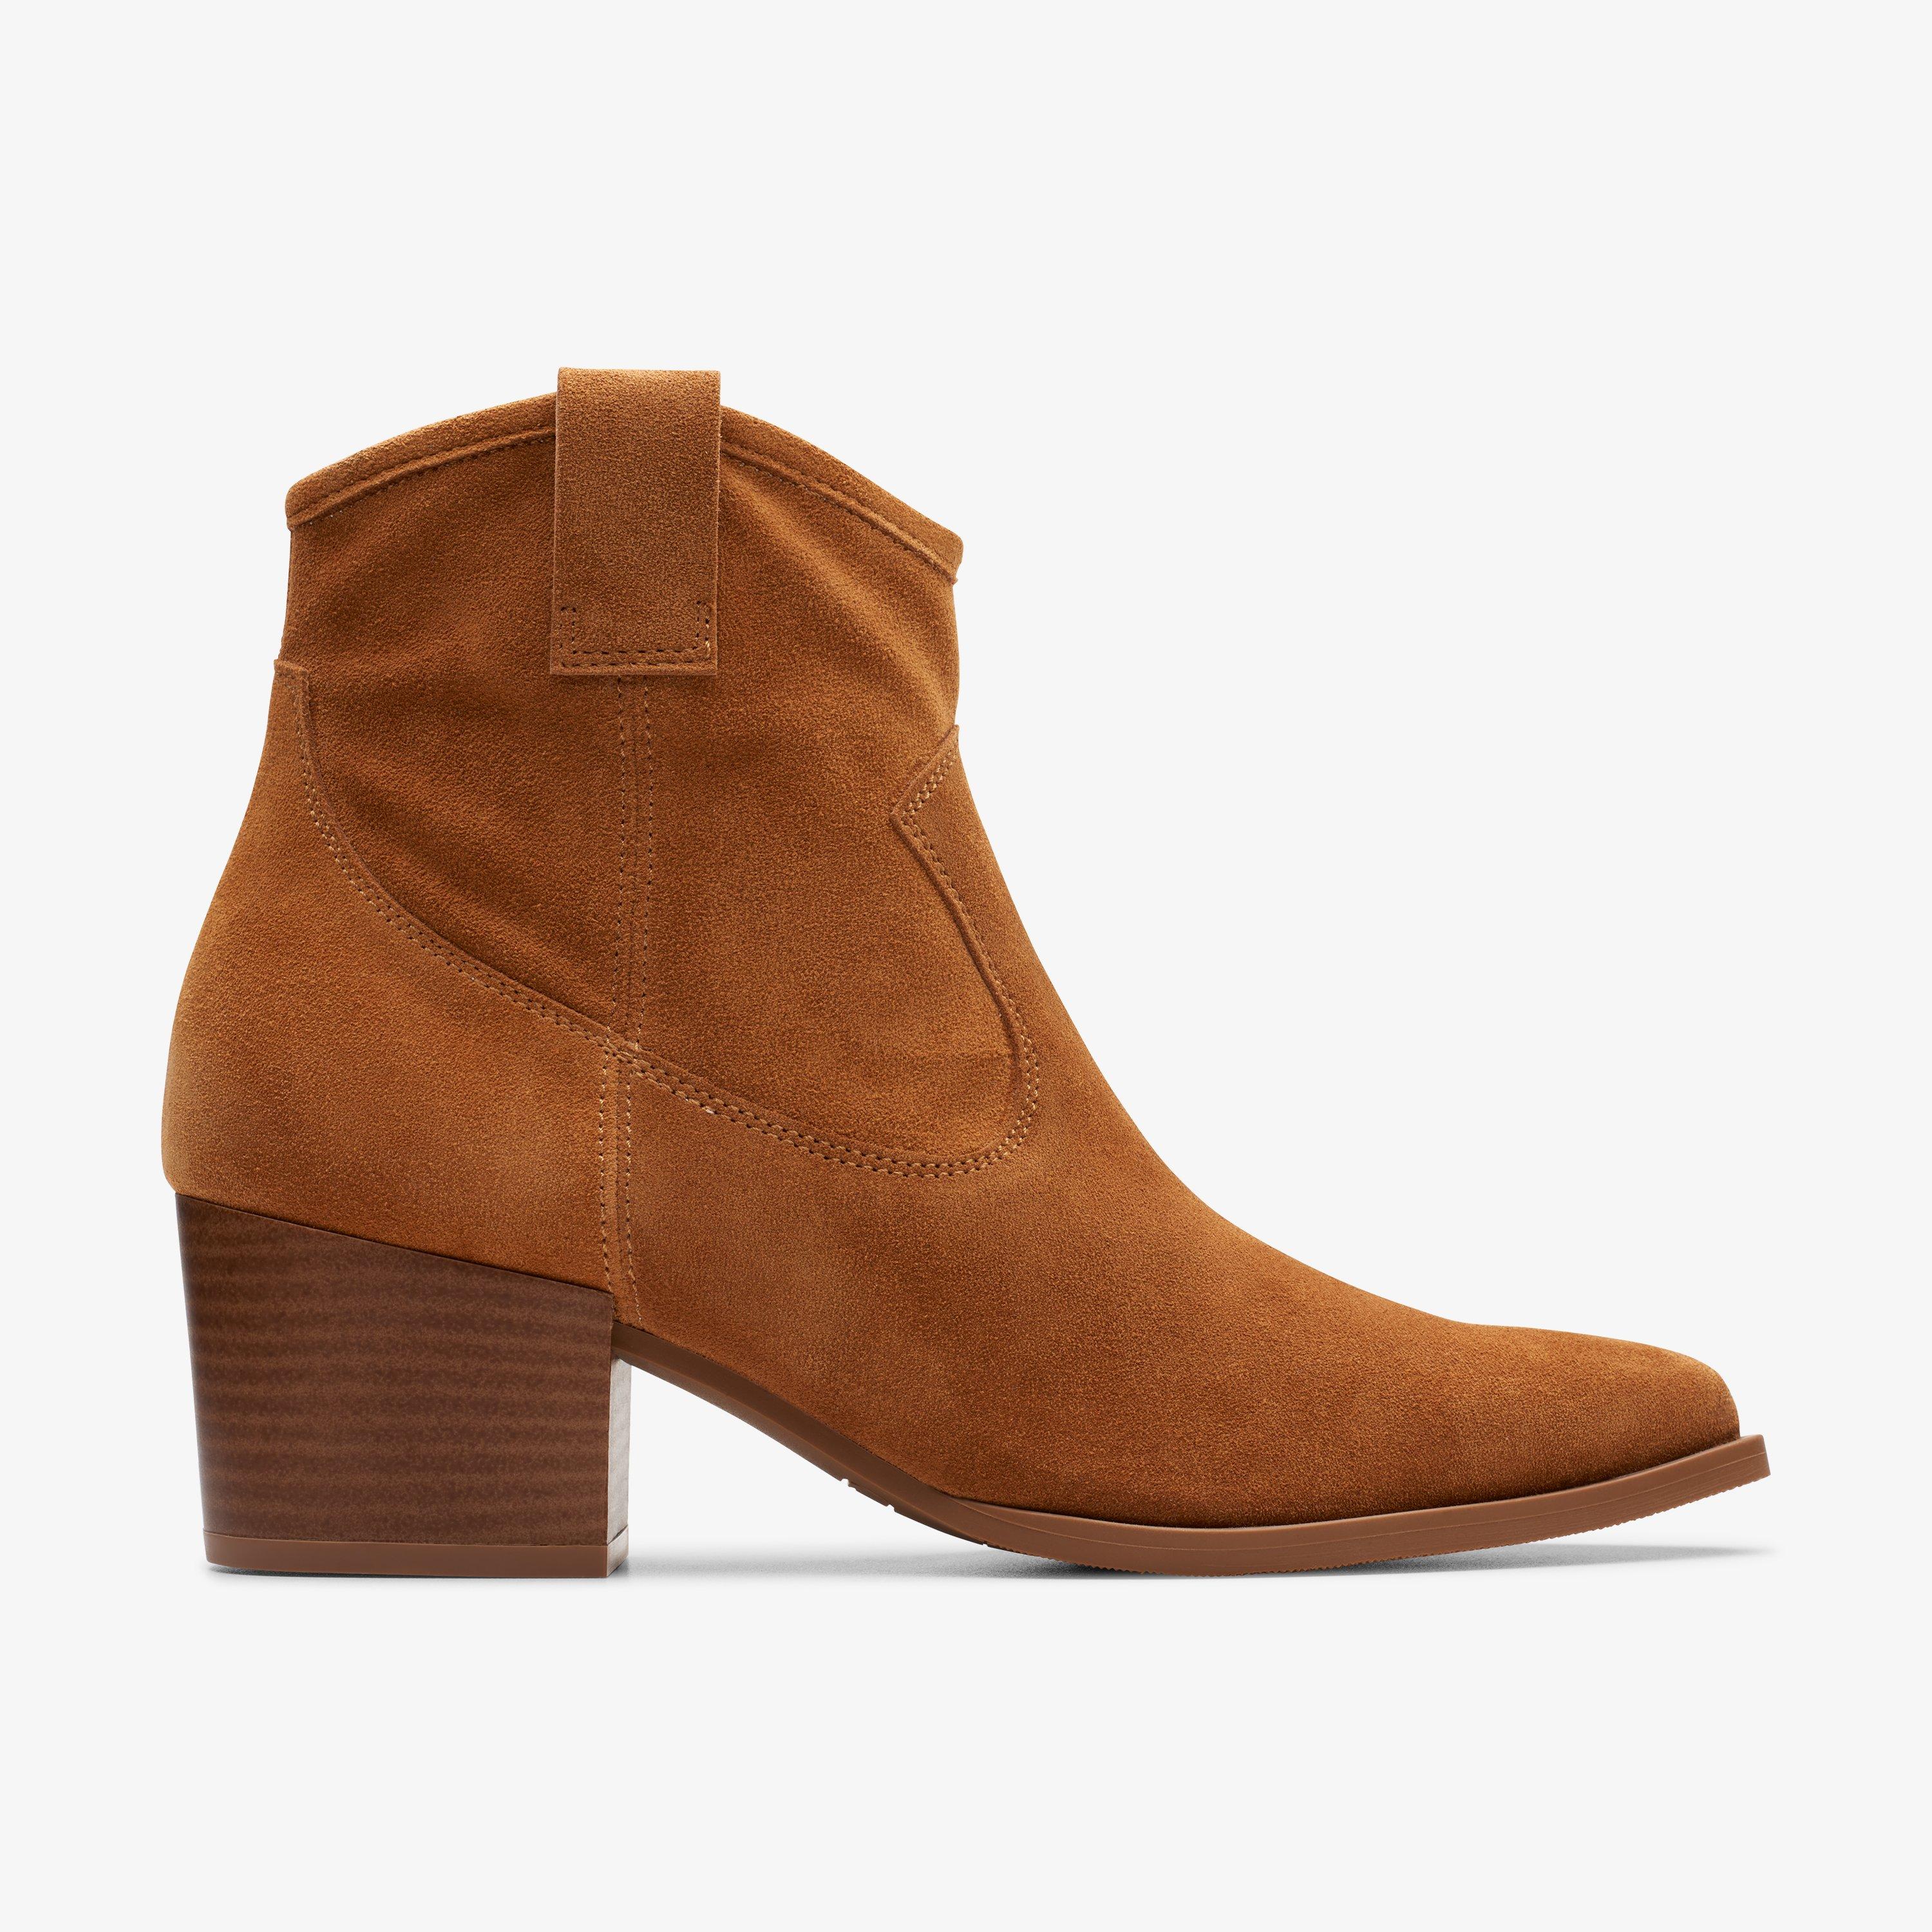 Women's Boots - Suede & Leather Boots | Clarks UK